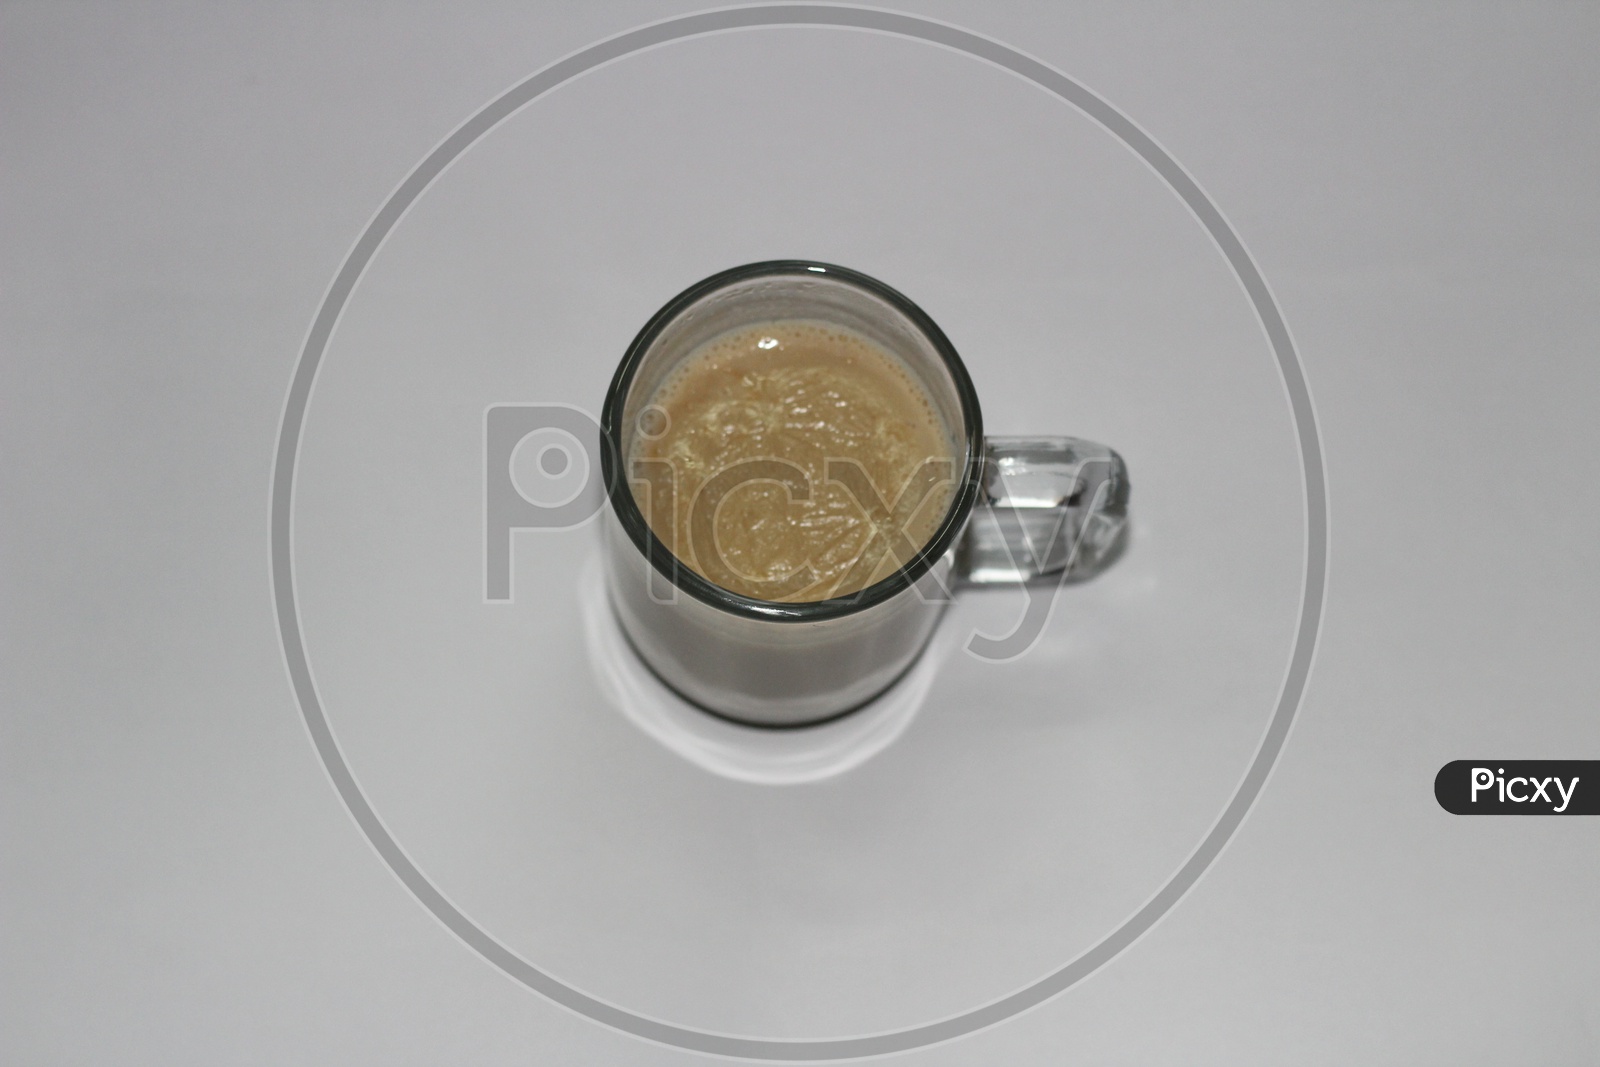 Tea Or Coffee in a Glassware Cup On an Isolated White Background